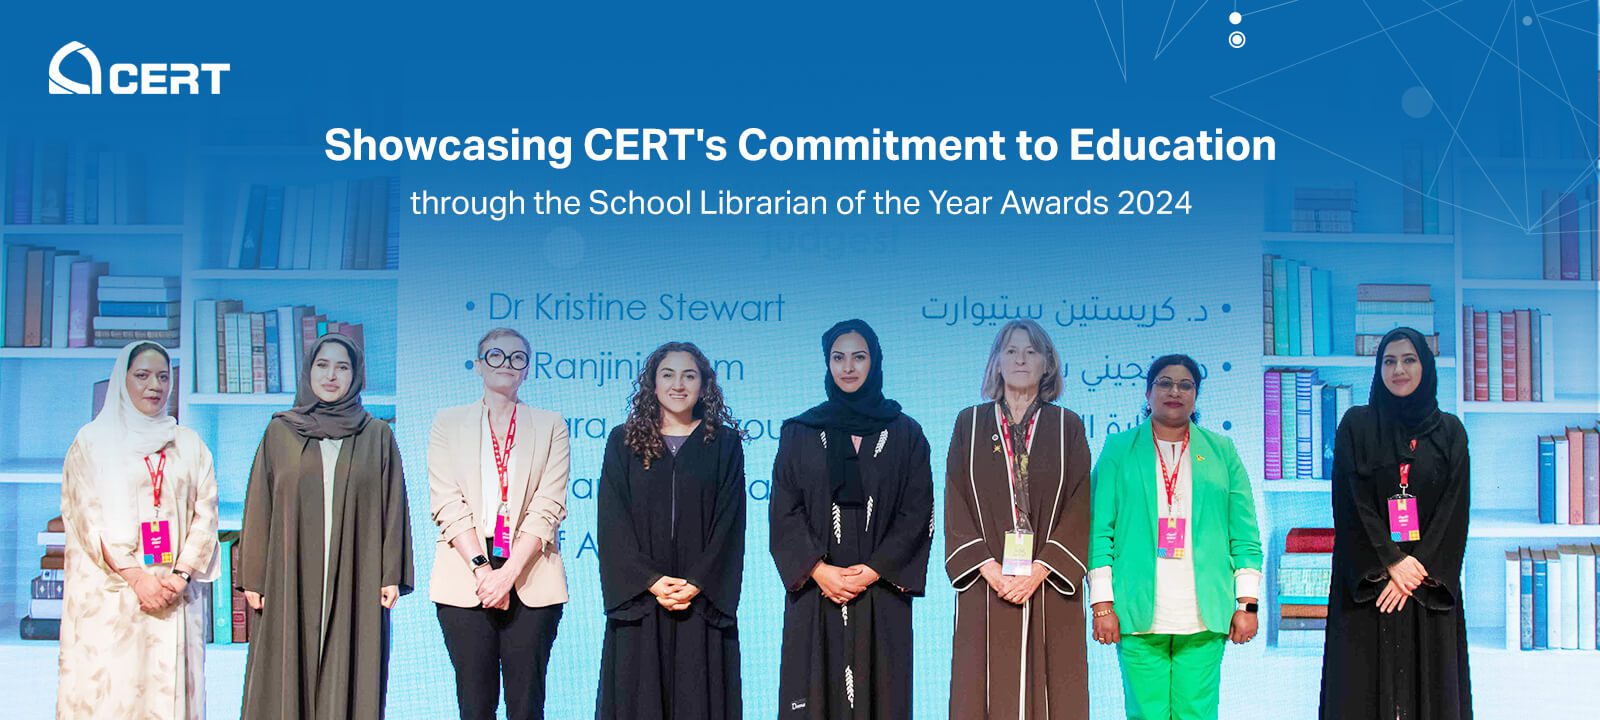 Showcasing CERT's Commitment to Education through the School Librarian of the Year Awards 2024